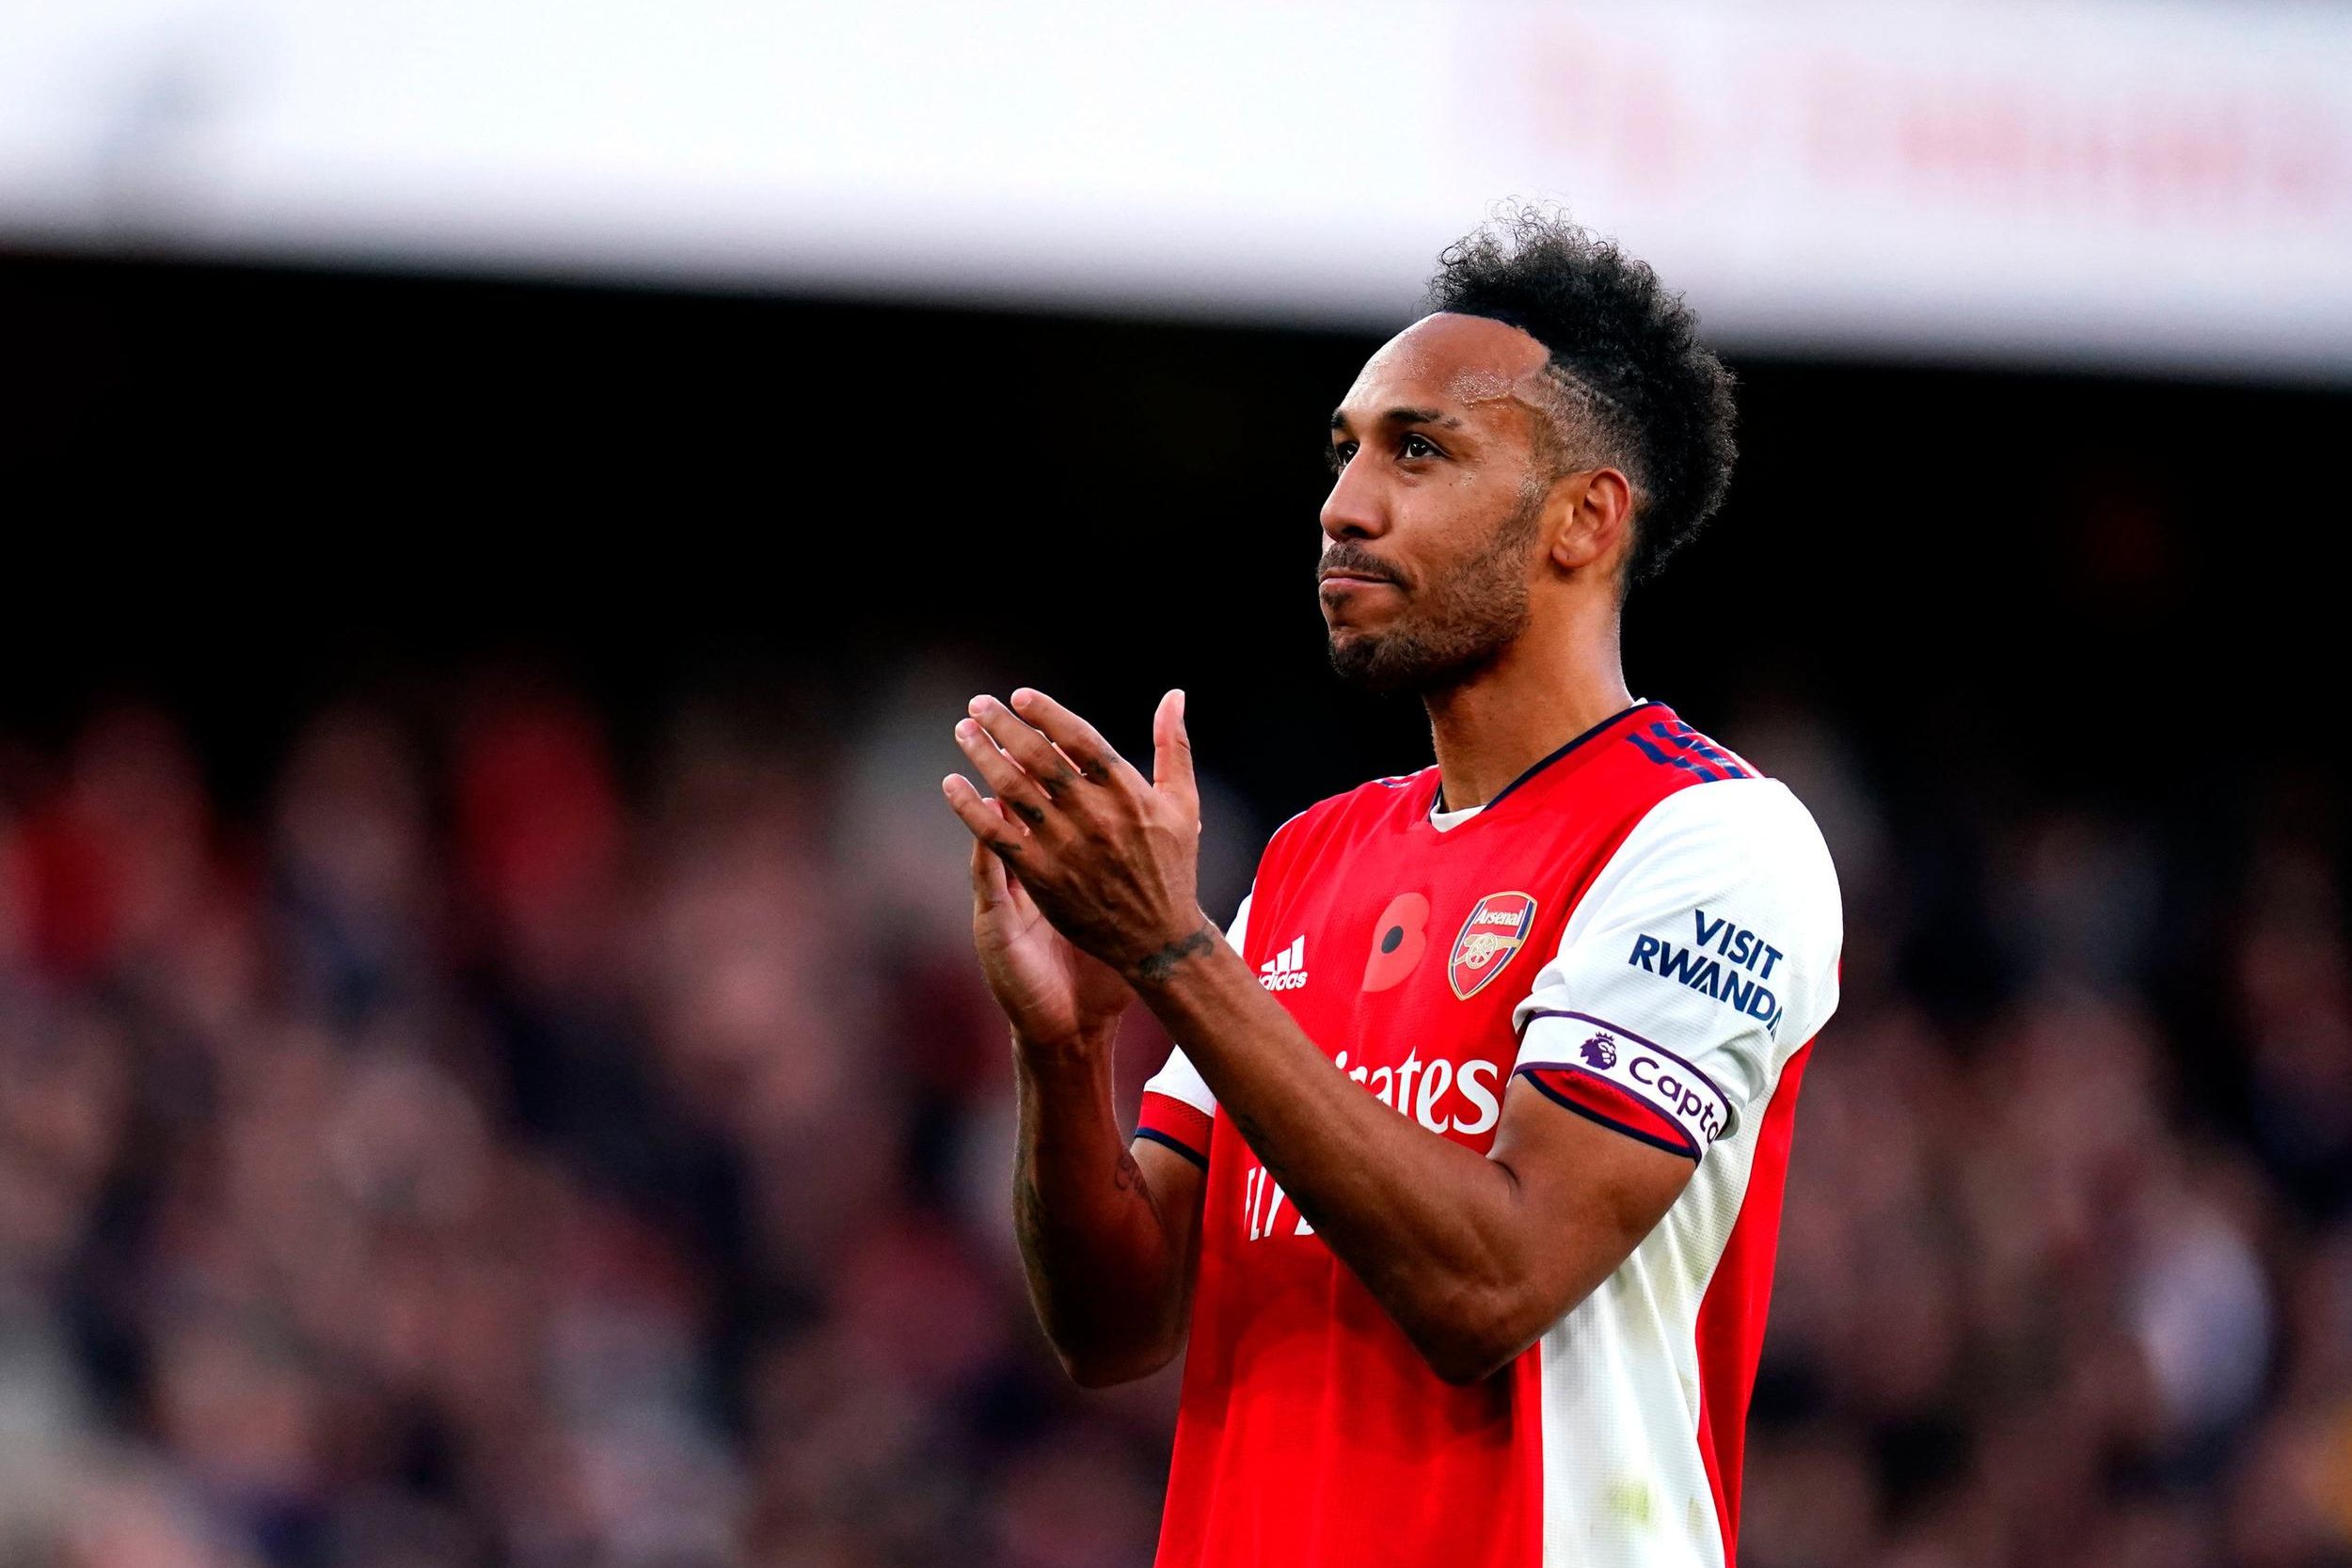 Pierre-Emerick Aubameyang stripped of Arsenal captaincy by Mikel Arteta  following latest disciplinary issue - The Short Fuse